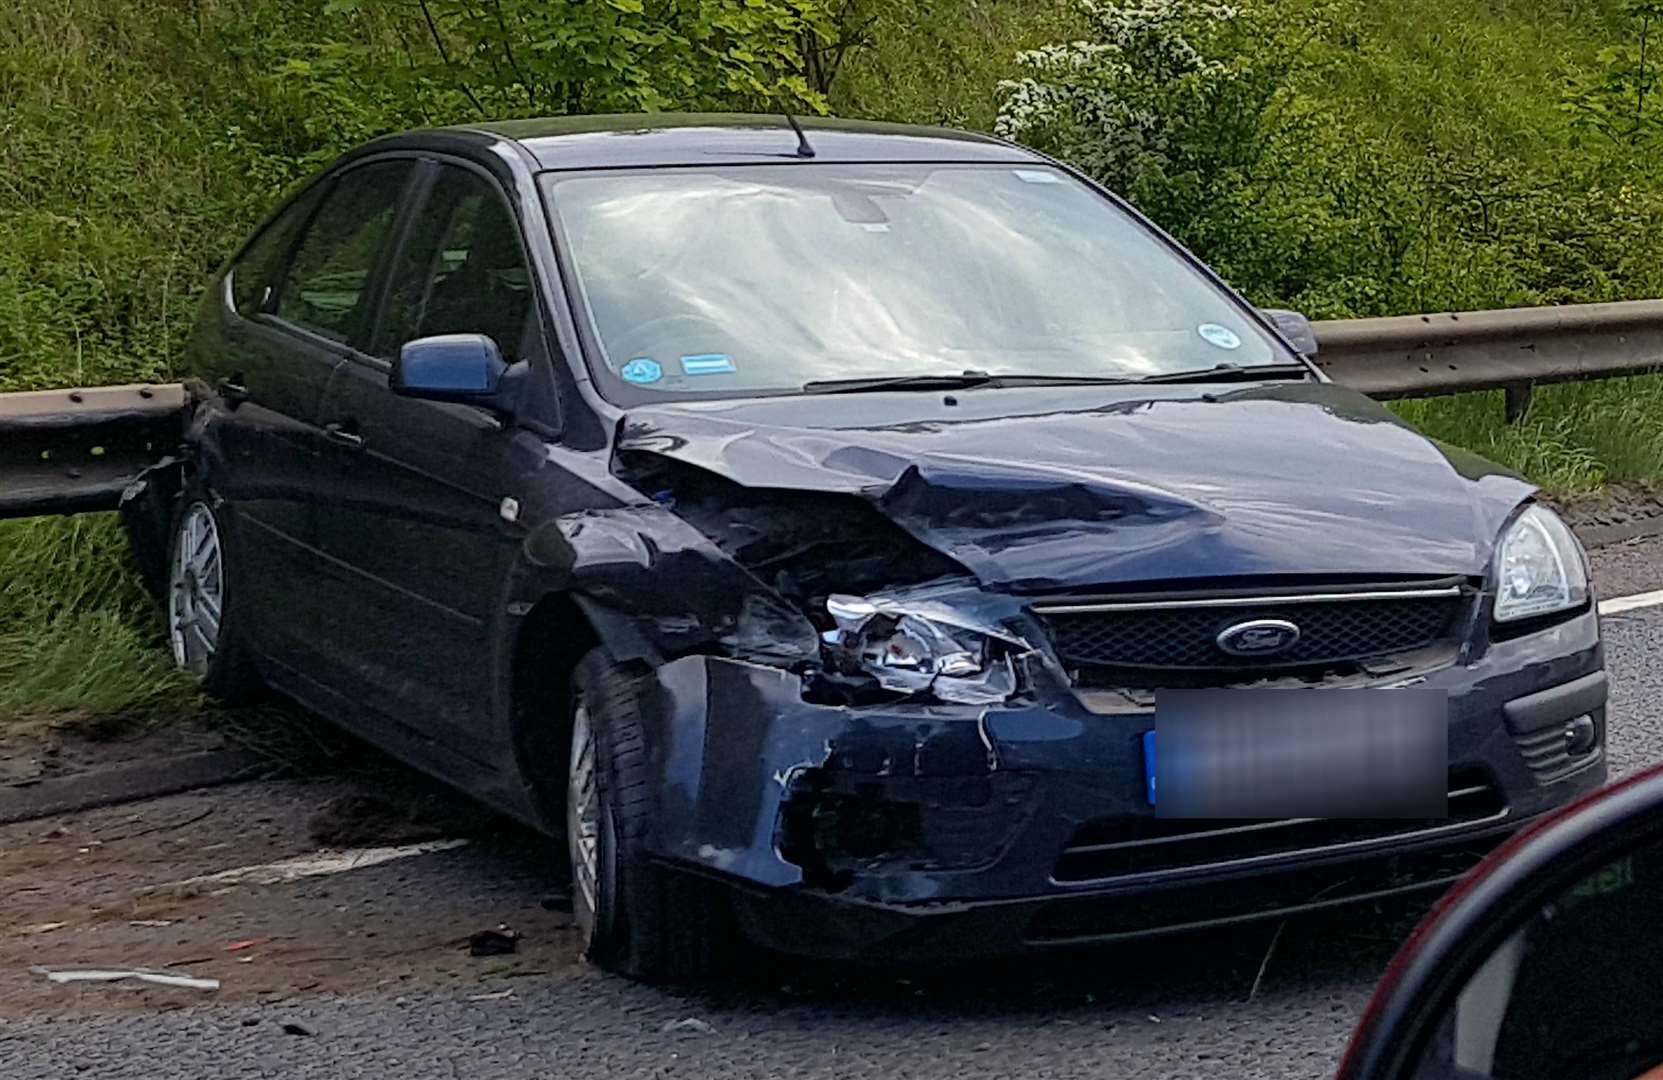 The car was badly damaged after the crash on the A20